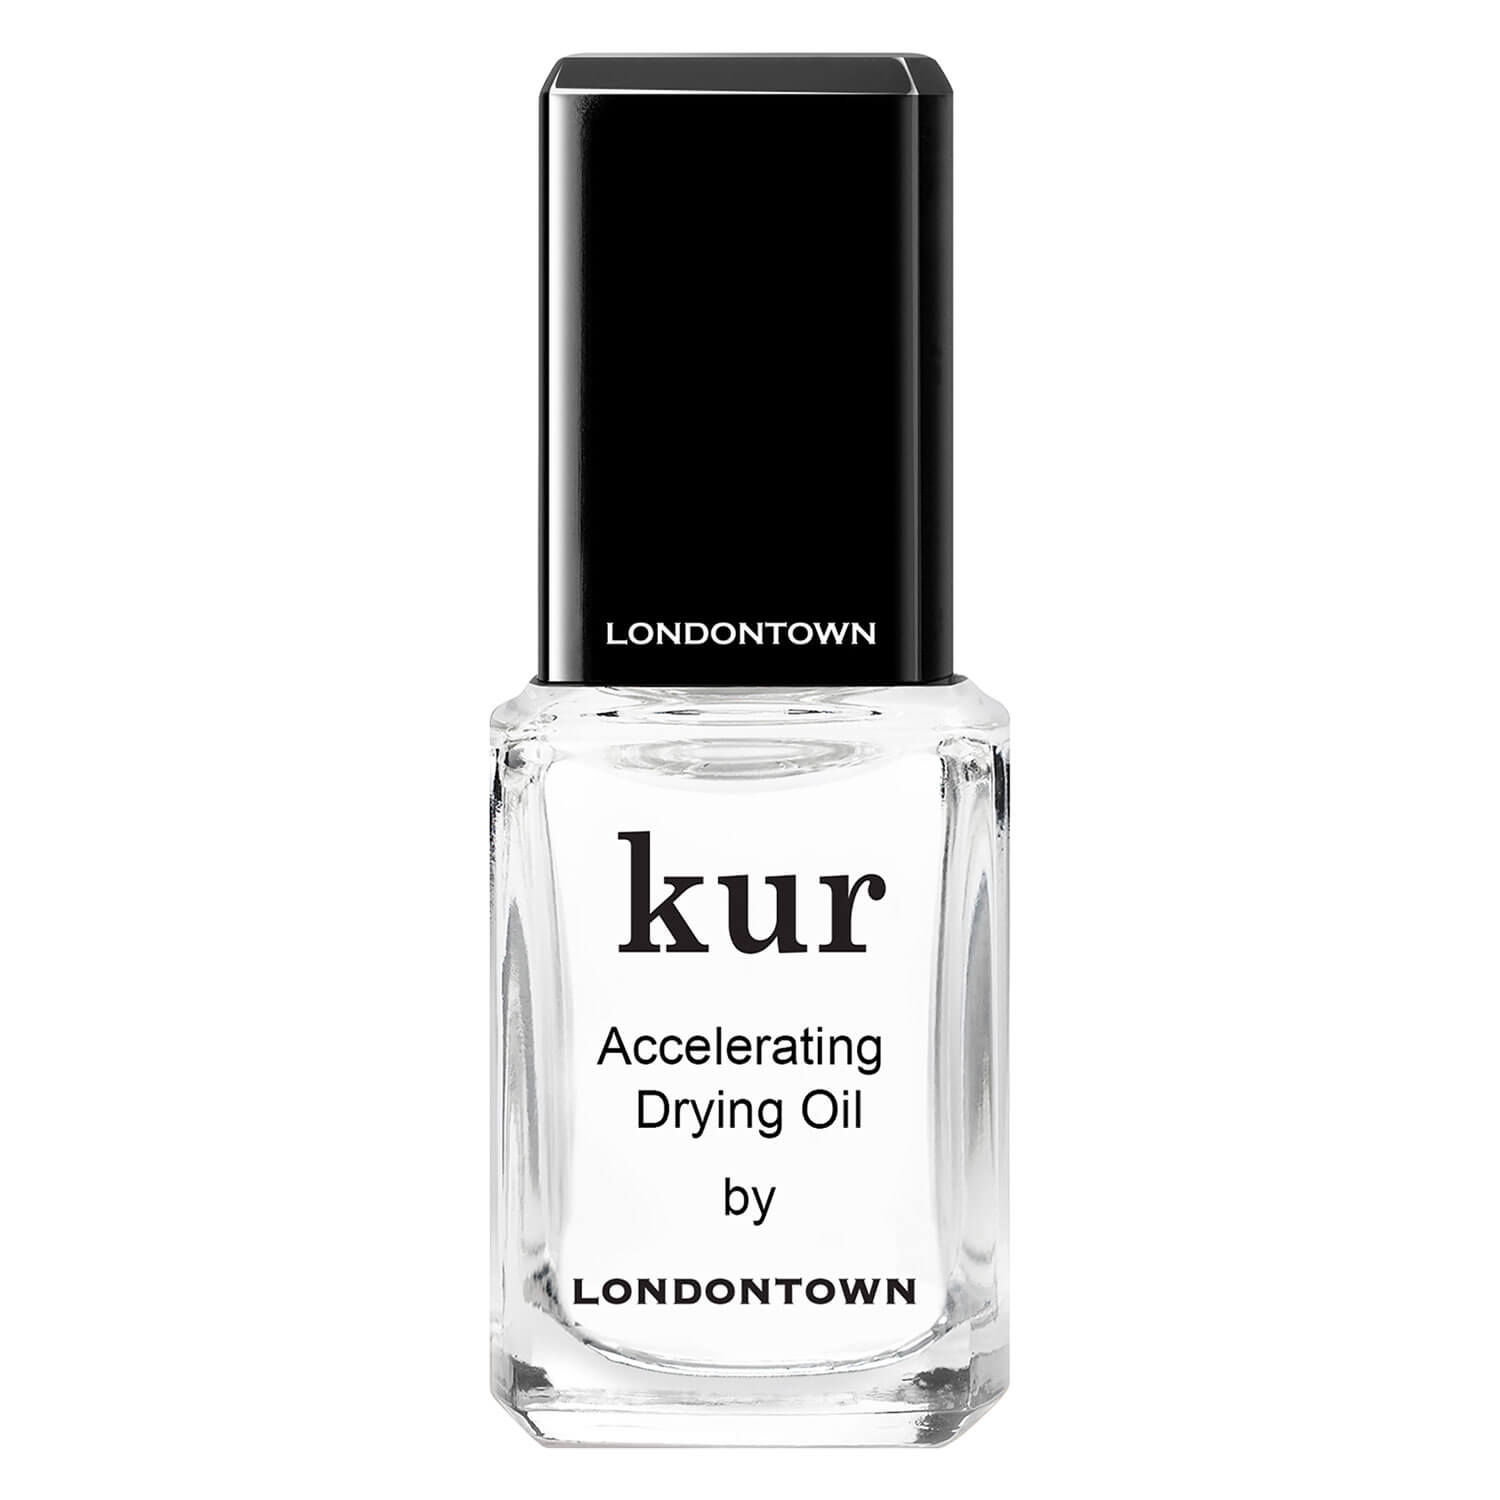 Product image from kur - Accelerating Drying Oil